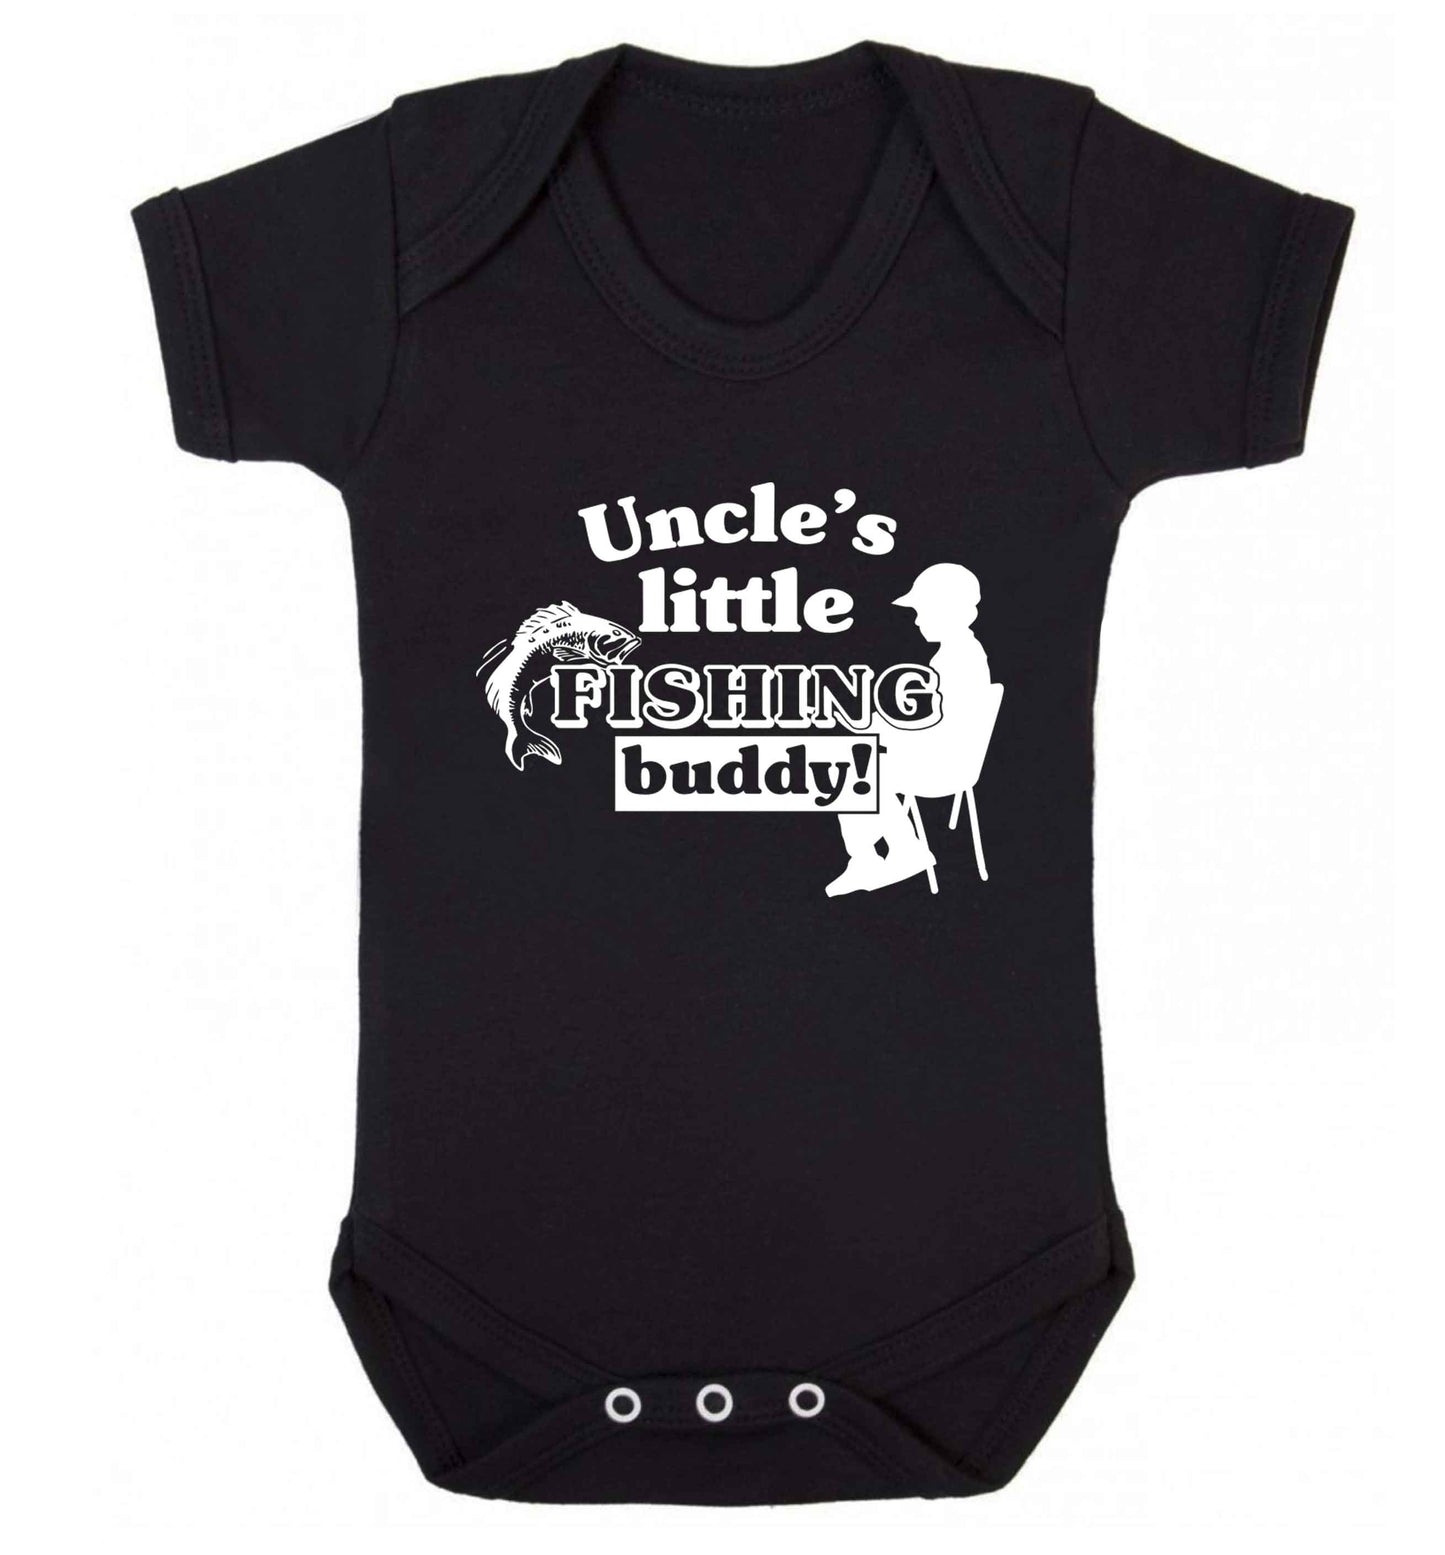 Uncle's little fishing buddy Baby Vest black 18-24 months